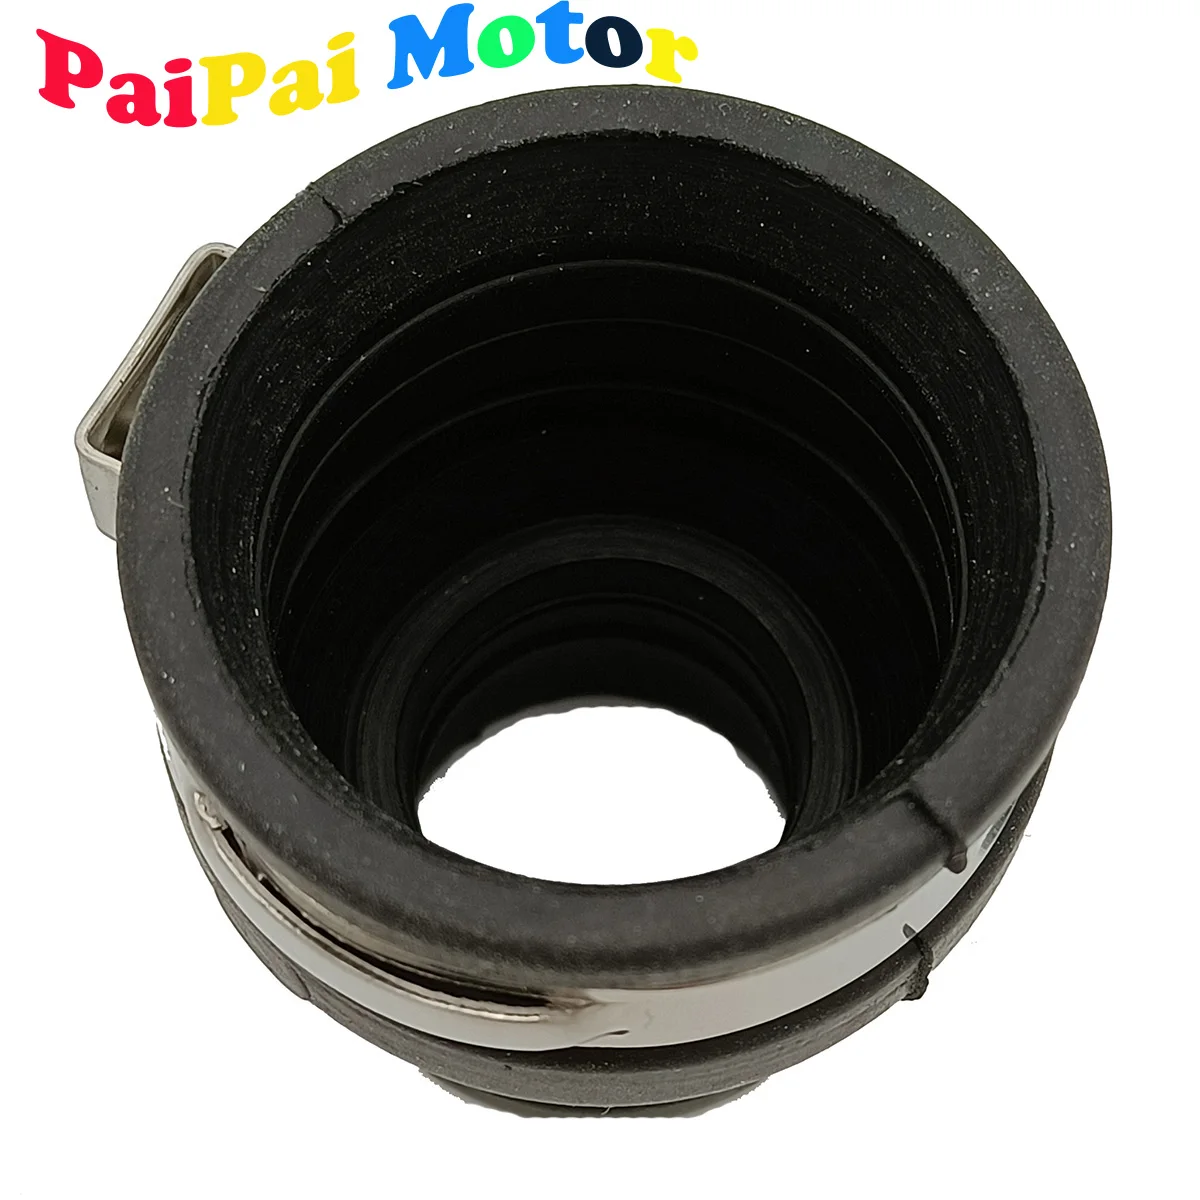 SeaDoo SPARK Drive Shaft Rubber Boot Seal Kit w/ Clamps Repl 295501148 271001762 images - 6